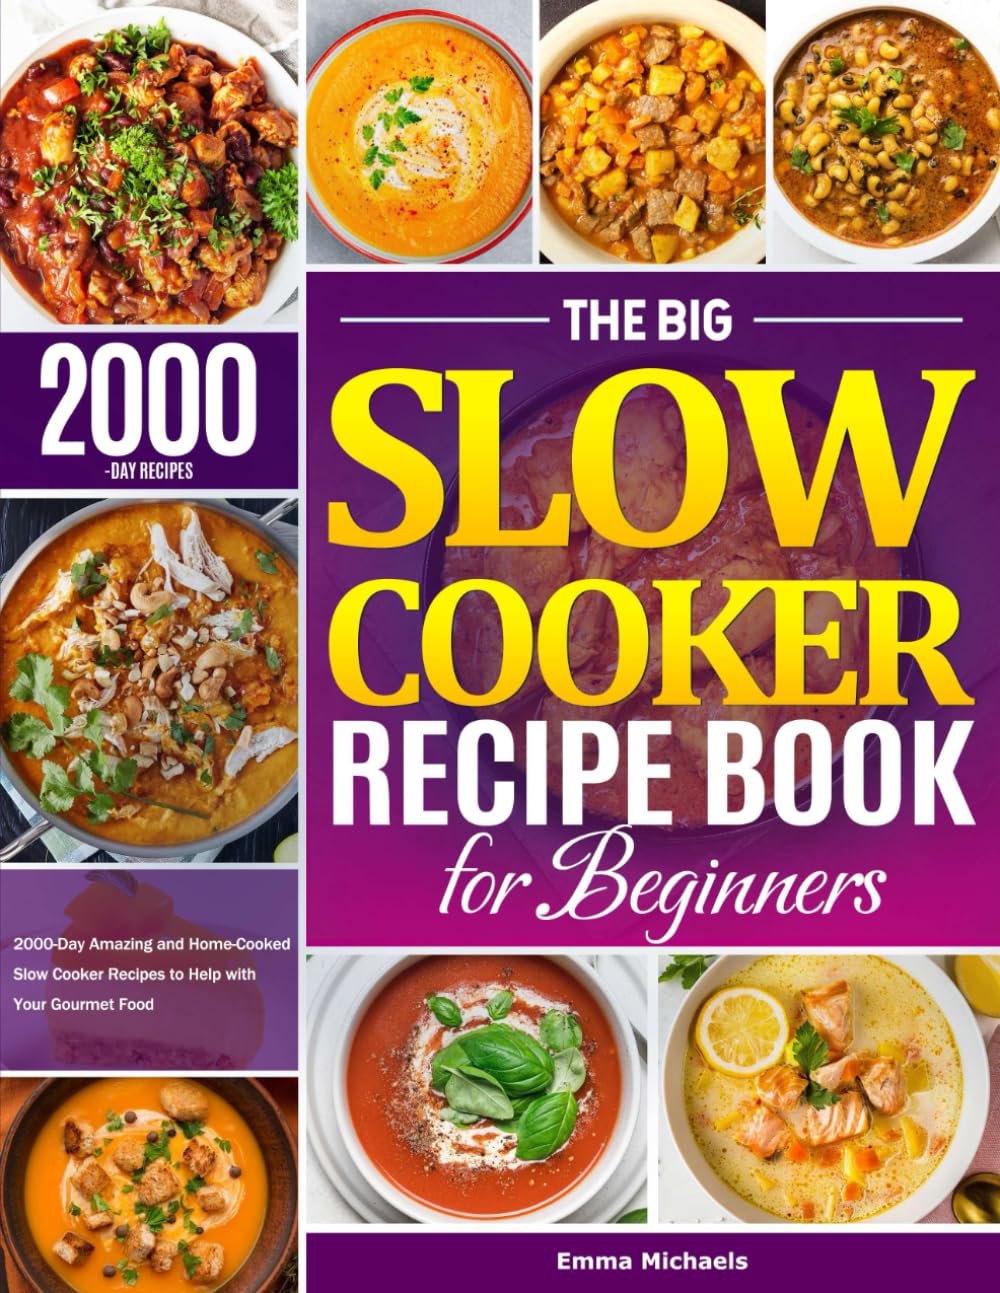 The Big Slow Cooker Recipe Book for Beginners: 2000-Day Amazing and Home-Cooked Slow Cooker Recipes to Help with Your Gourmet Food     Paperback – November 8, 2023